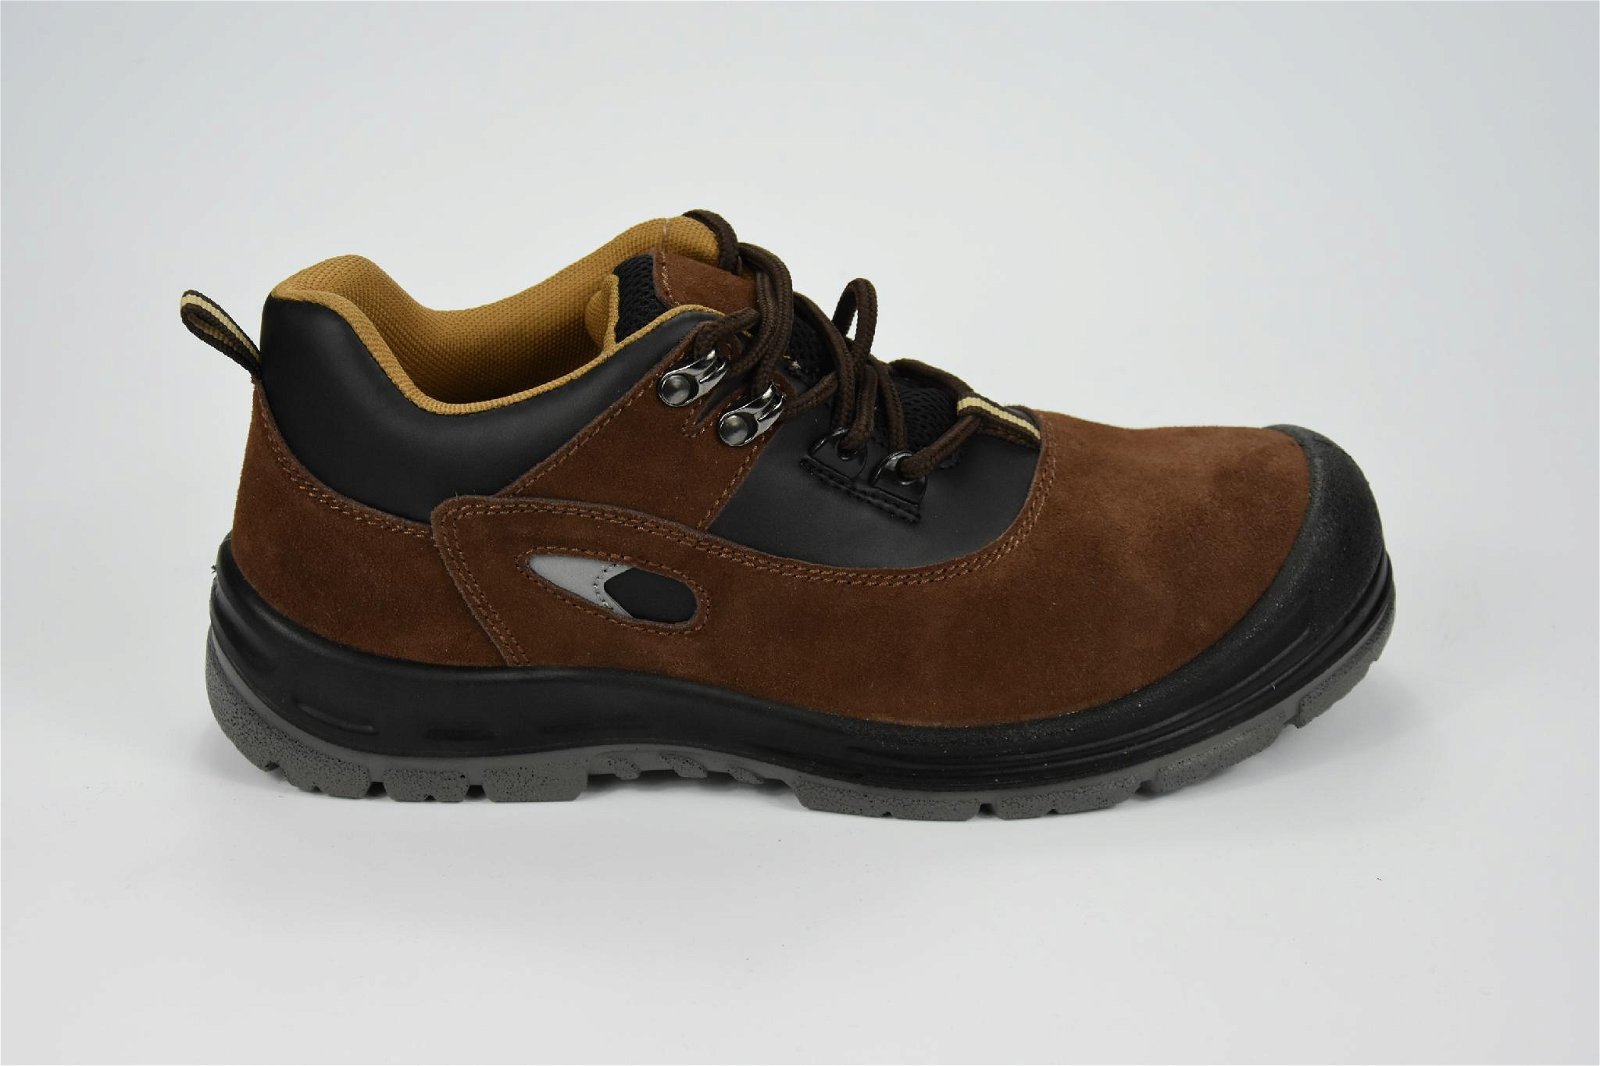 safety shoe - GHG-118010 (China Manufacturer) - Work & Safety Shoes ...